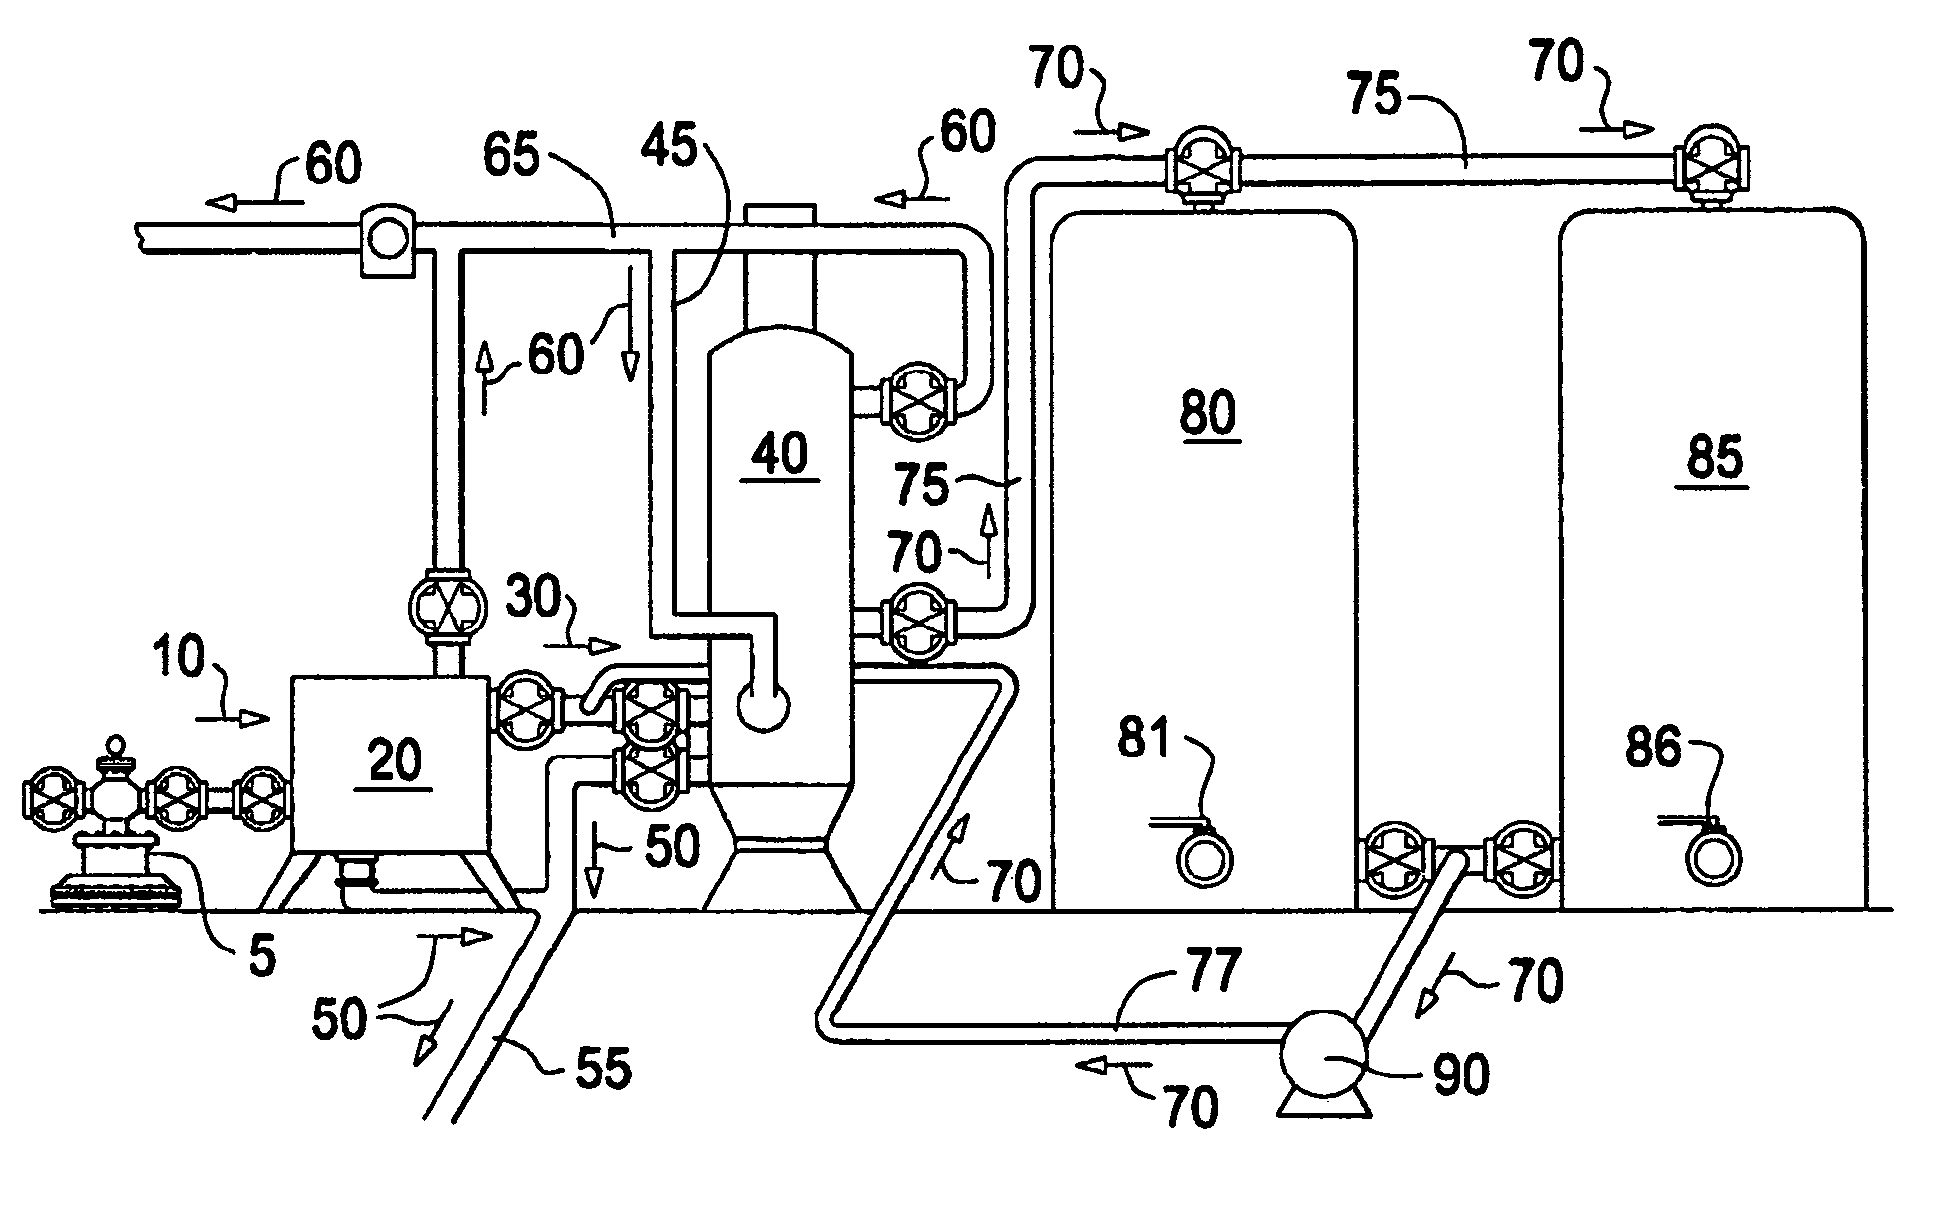 Method and apparatus to reduce a venting of raw natural gas emissions